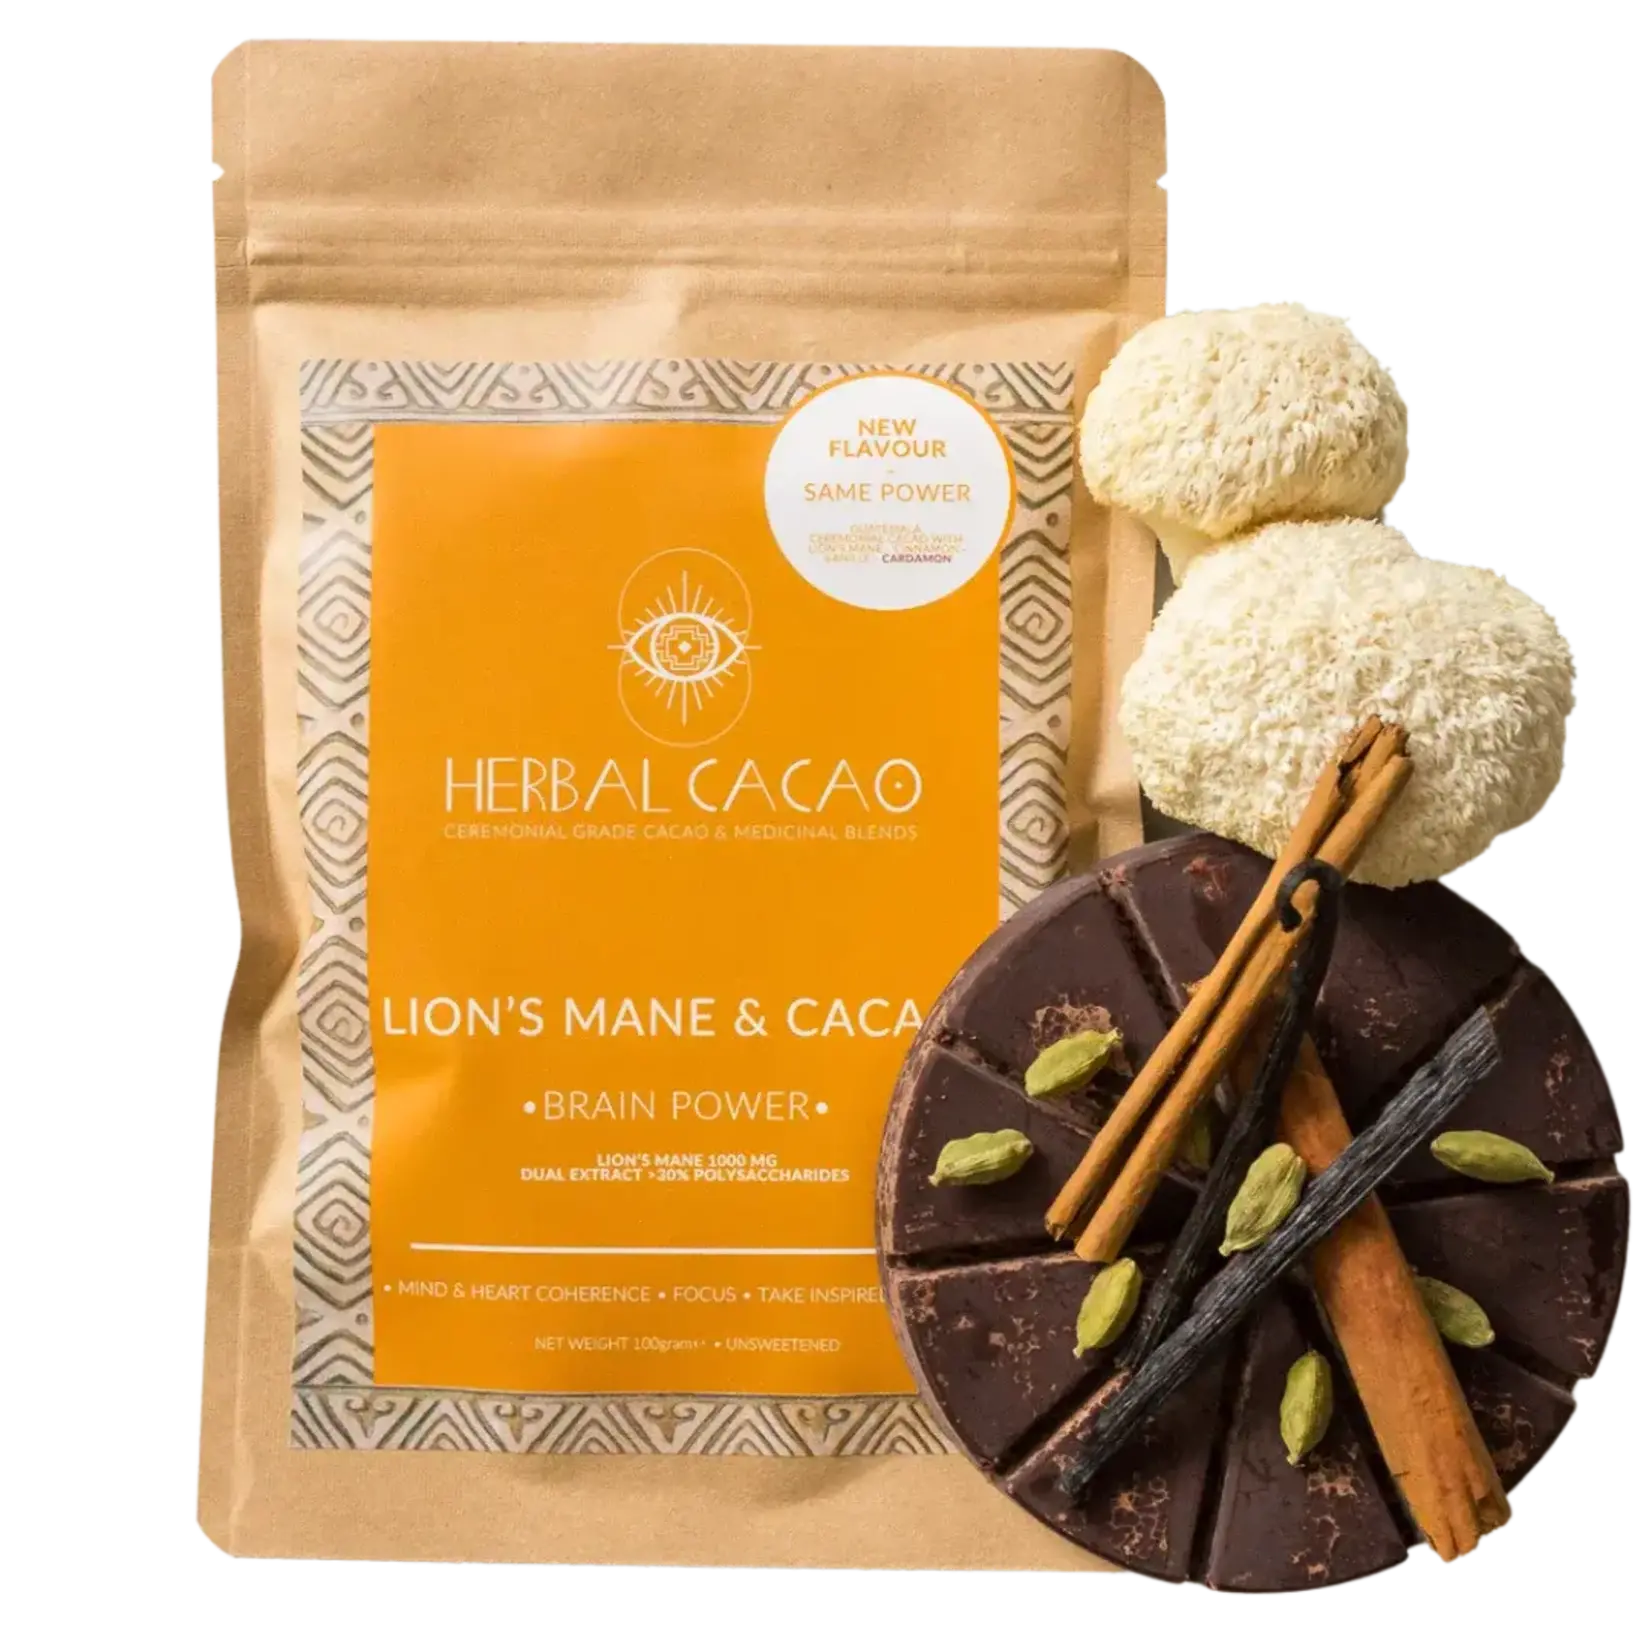 Herbal Cacao "Brain Power" - New Flavour